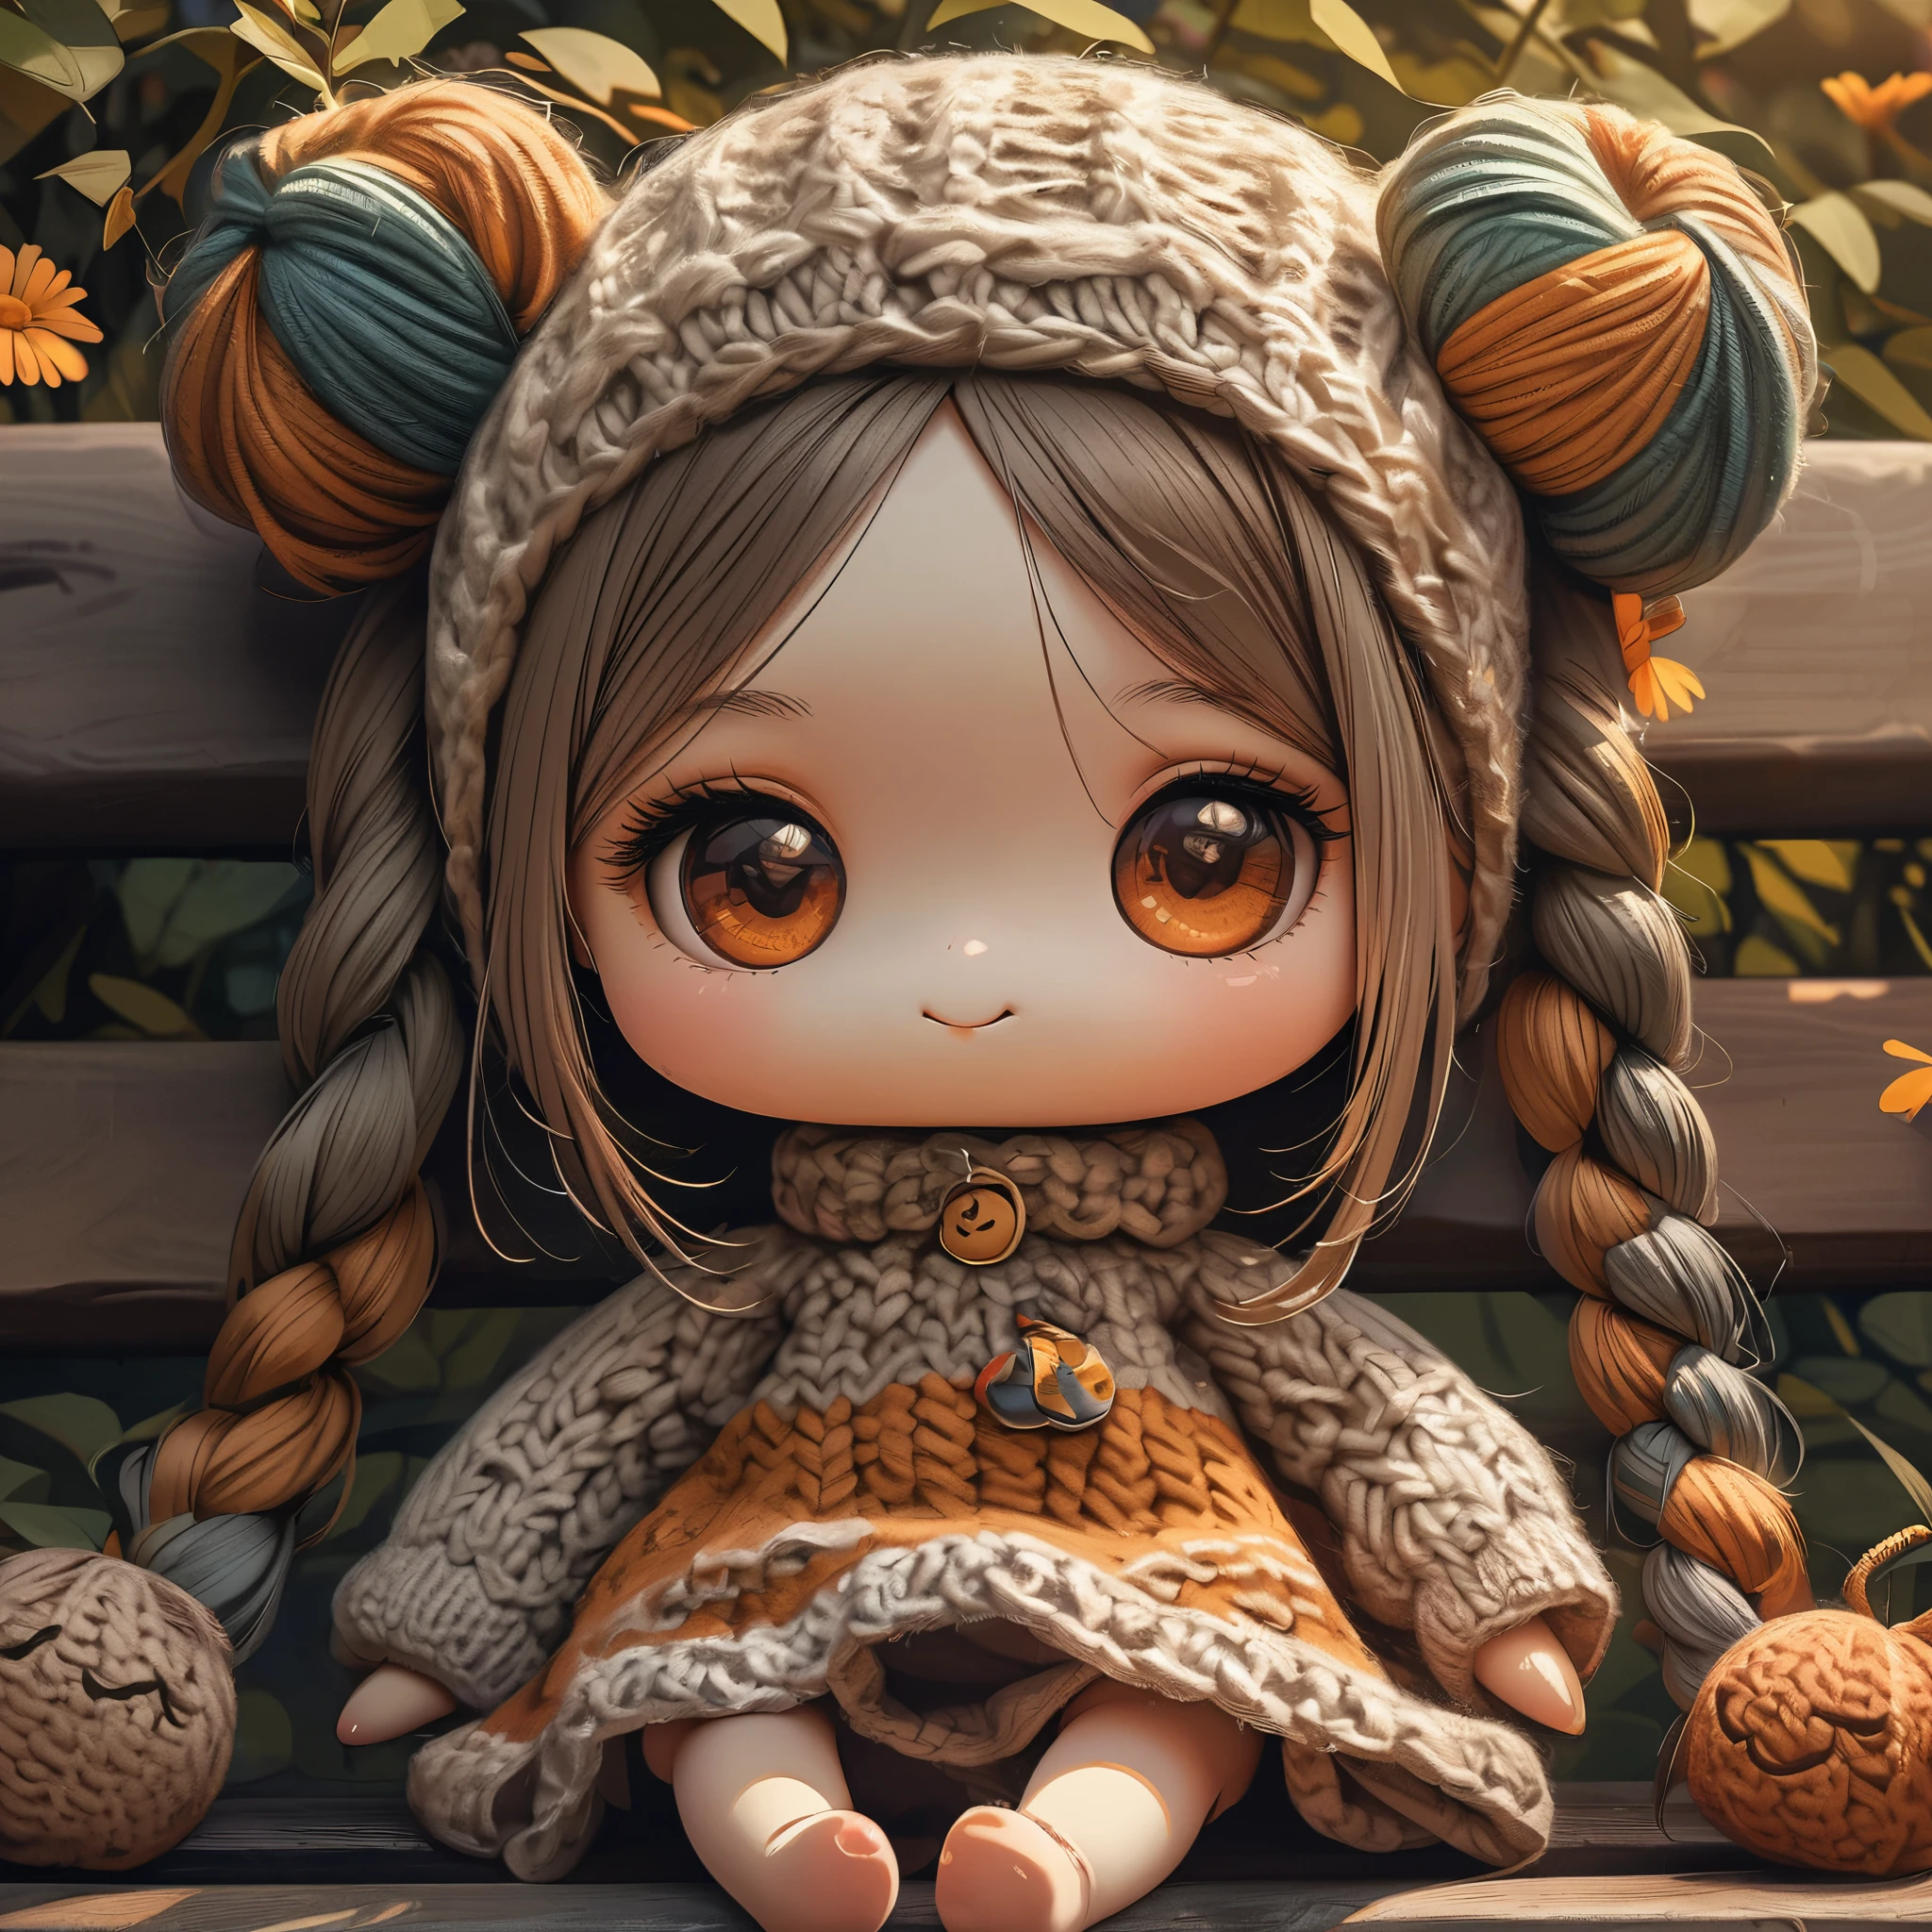 (La best quality,High resolution,super detailed,actual),2 cute knitted dolls，in the garden，smiley face，（（A masterpiece full of fantasy elements）））， （（best quality））， （（intricate details））（8K）